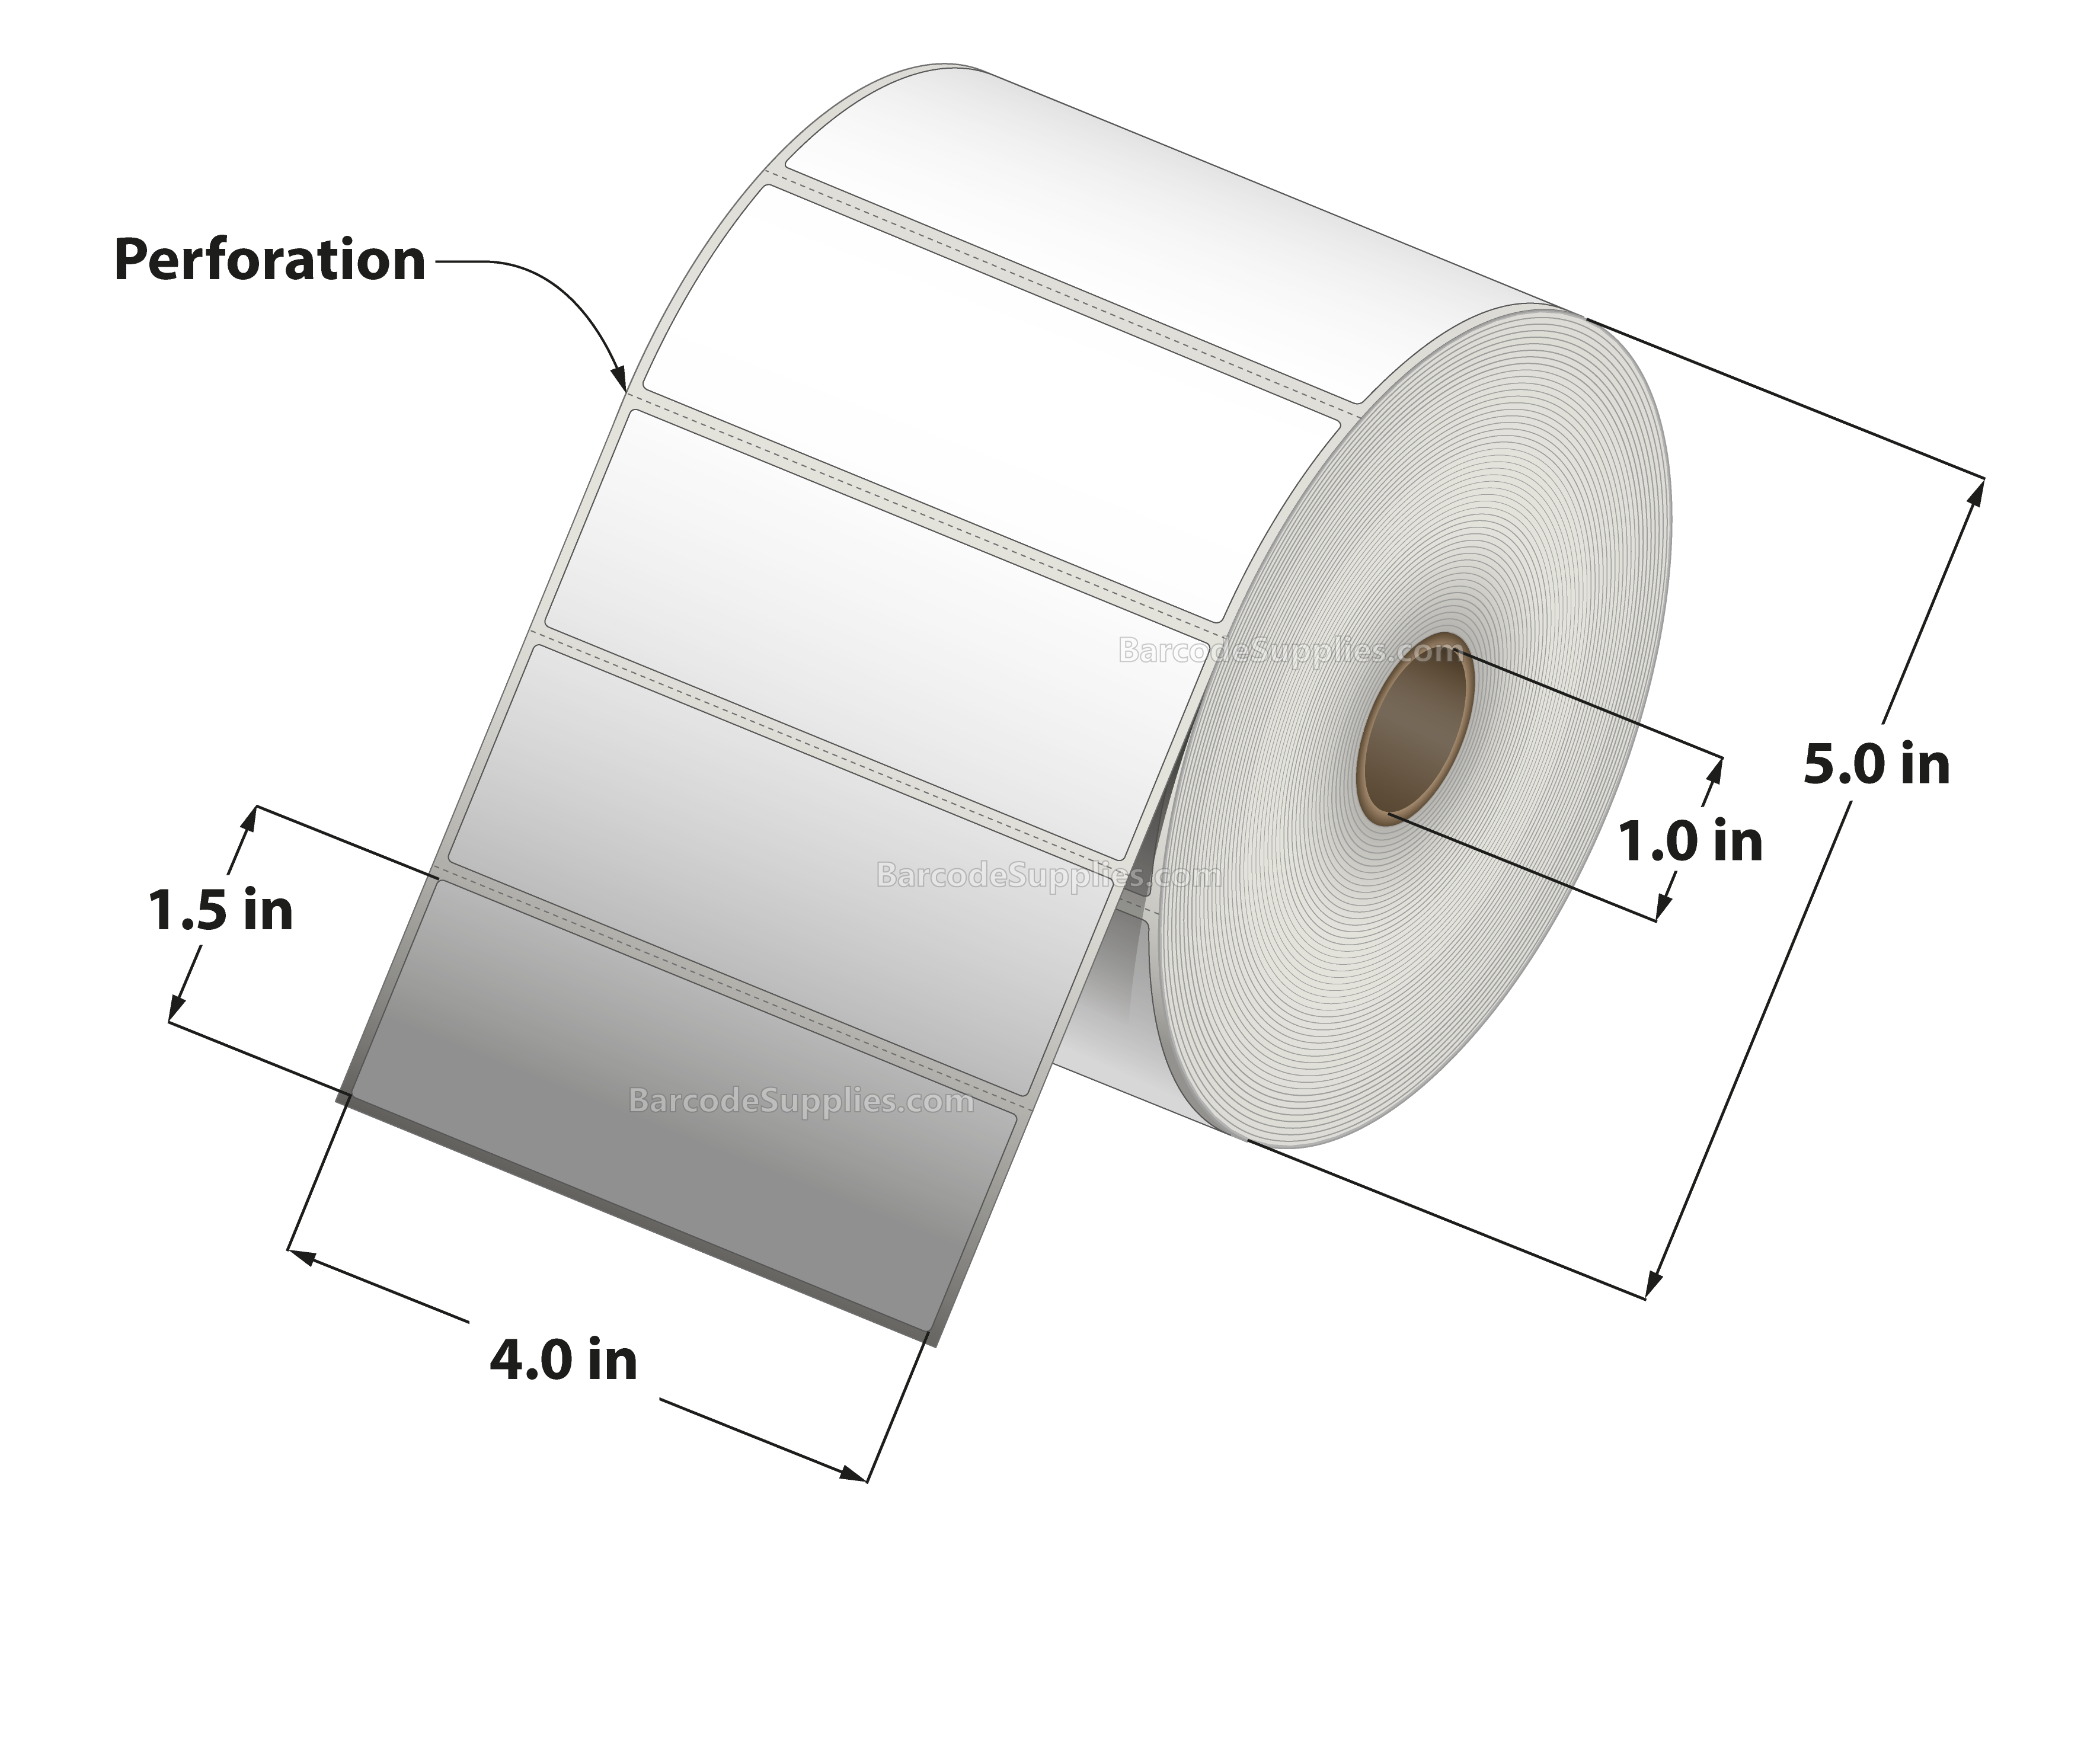 4 x 1.5 Direct Thermal White Labels With Acrylic Adhesive - Perforated - 1800 Labels Per Roll - Carton Of 12 Rolls - 21600 Labels Total - MPN: RD-4-15-1800-1 - BarcodeSource, Inc.